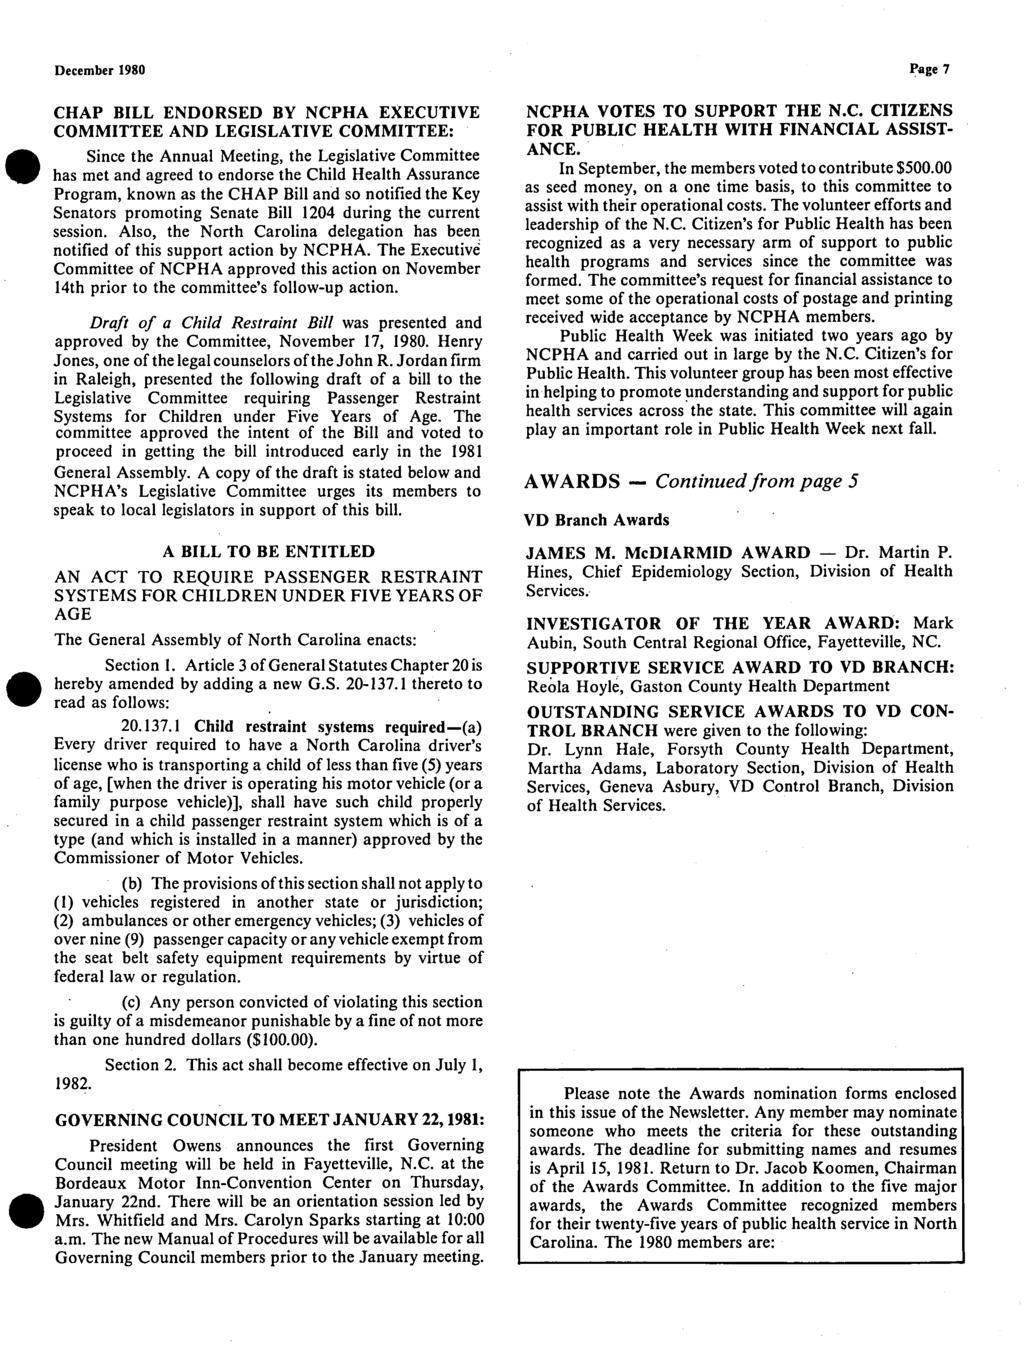 December 1980 Page 7 40 CHAP BILL ENDORSED BY NCPHA EXECUTIVE COMMITTEE AND LEGISLATIVE COMMITTEE: Since the Annual Meeting, the Legislative Committee has met and agreed to endorse the Child Health